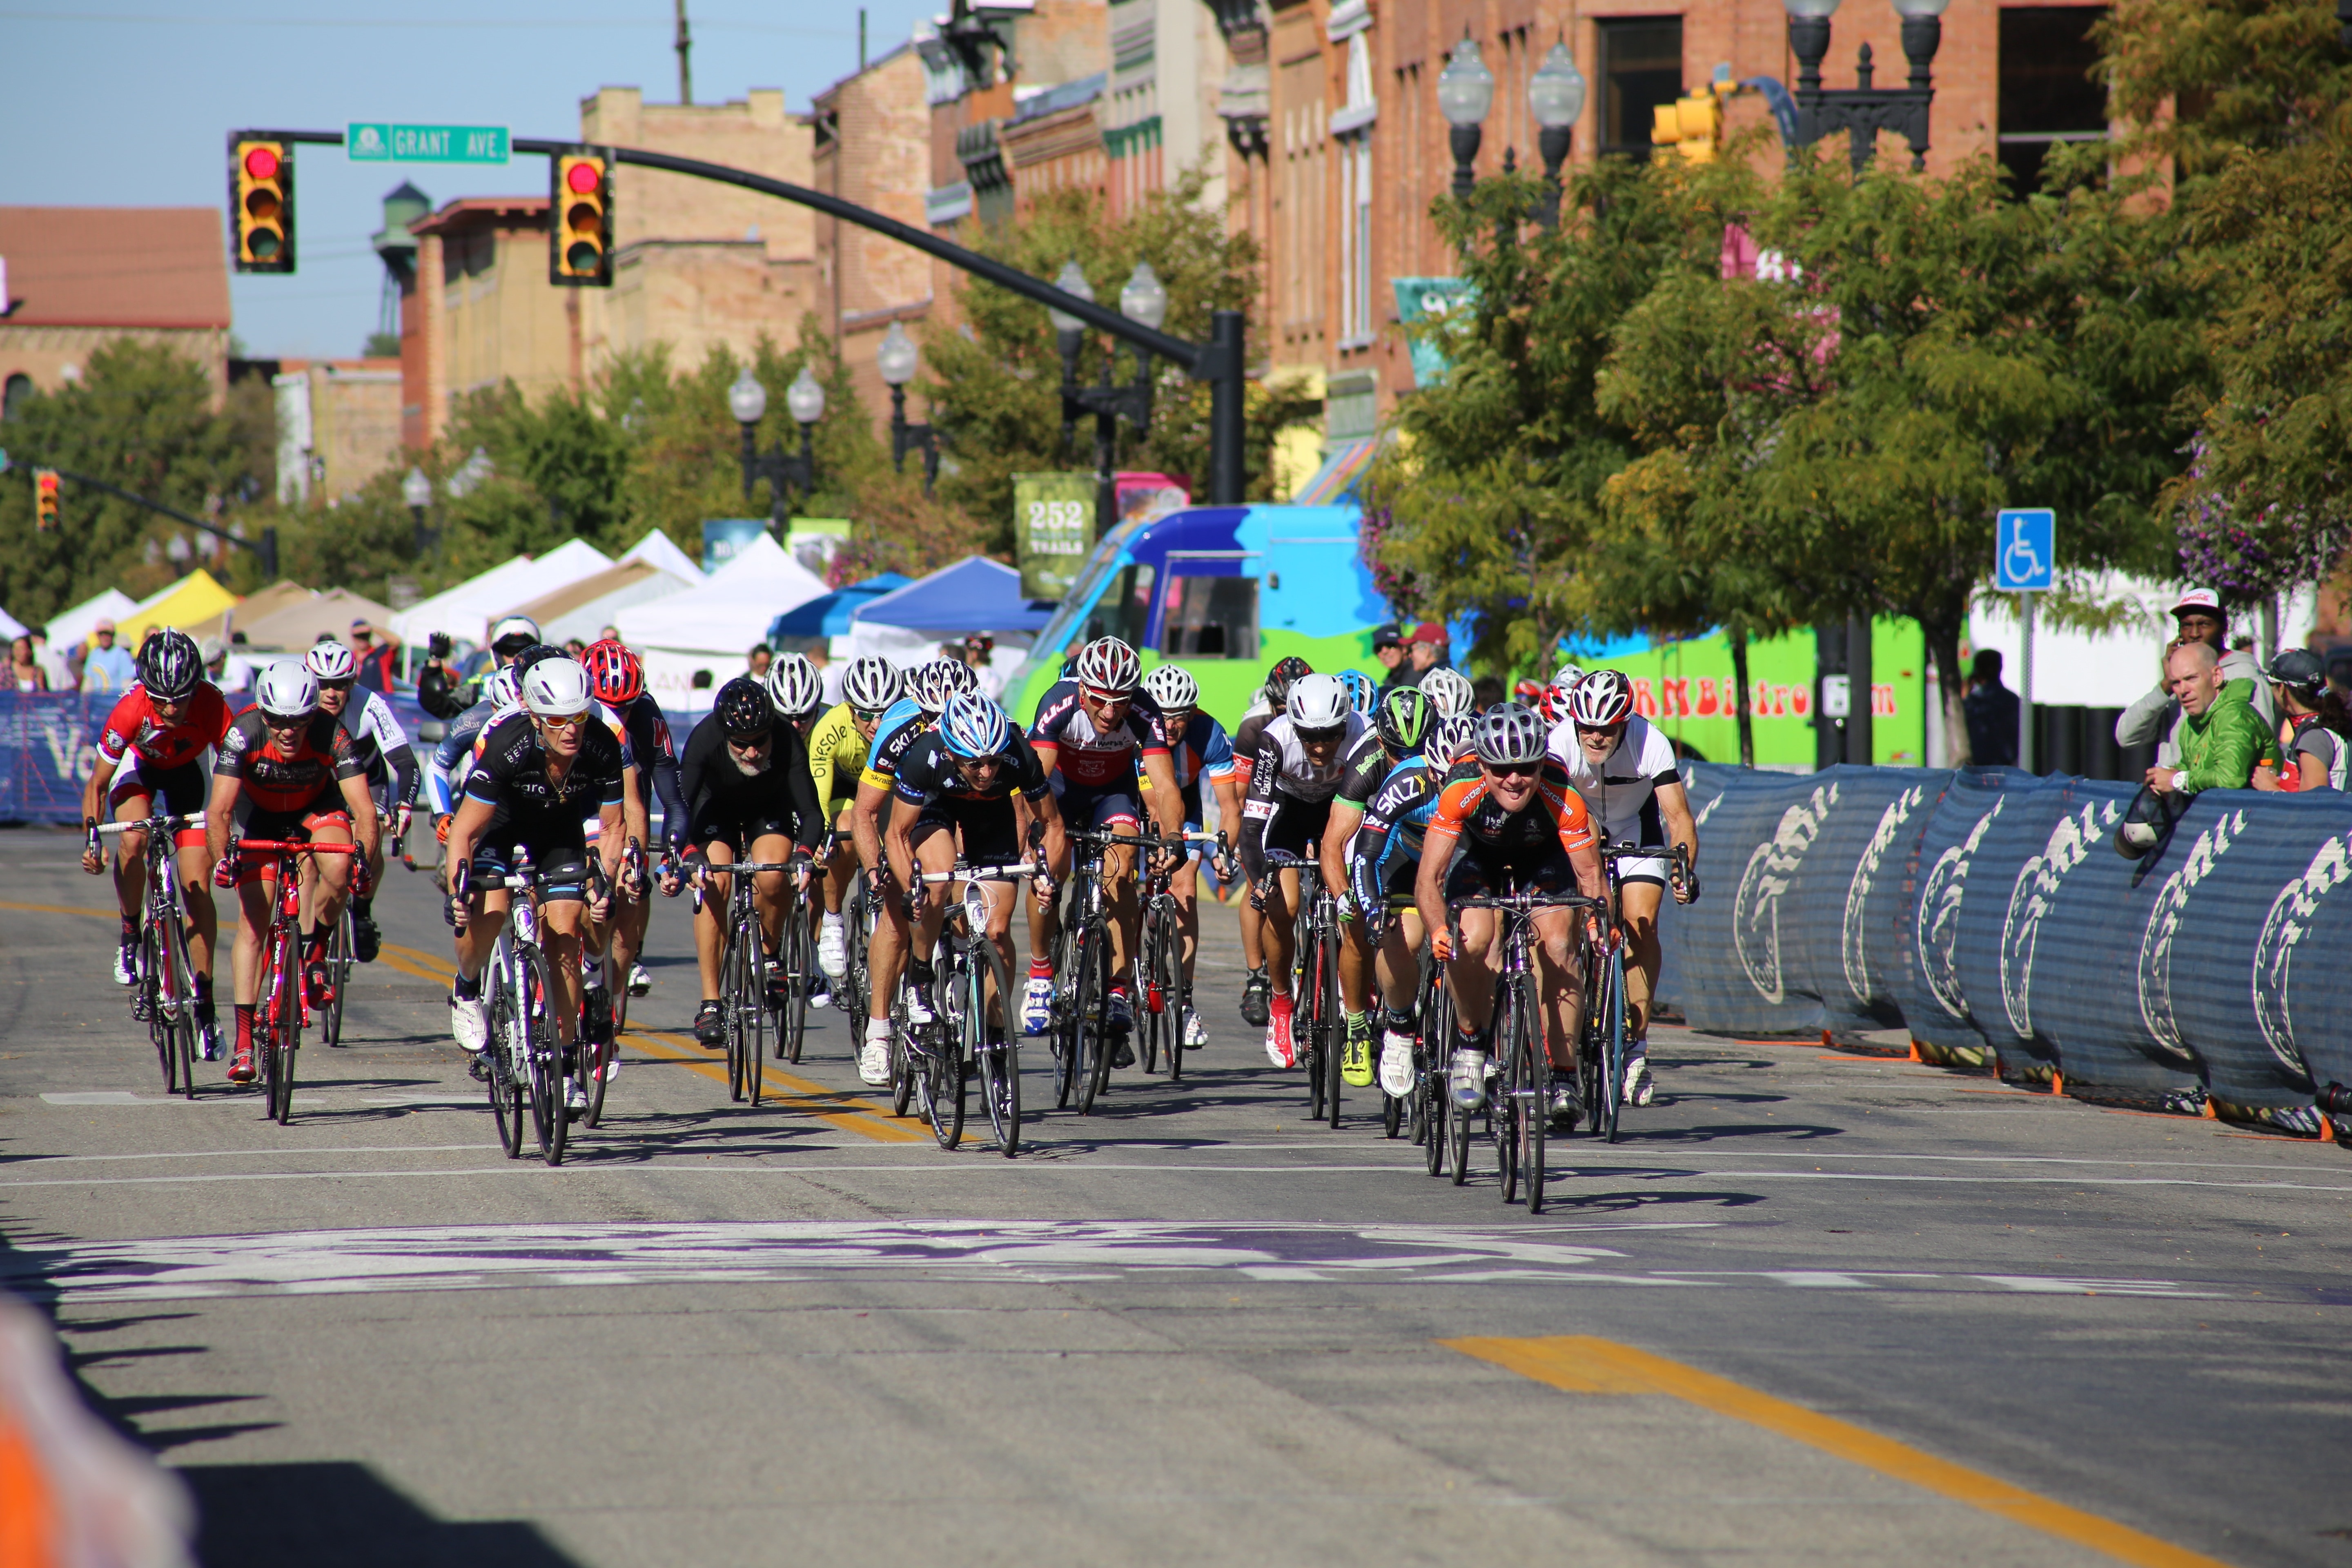 Bike, Race, Cyclist, Event, Bike Race, bicycle, large group of people